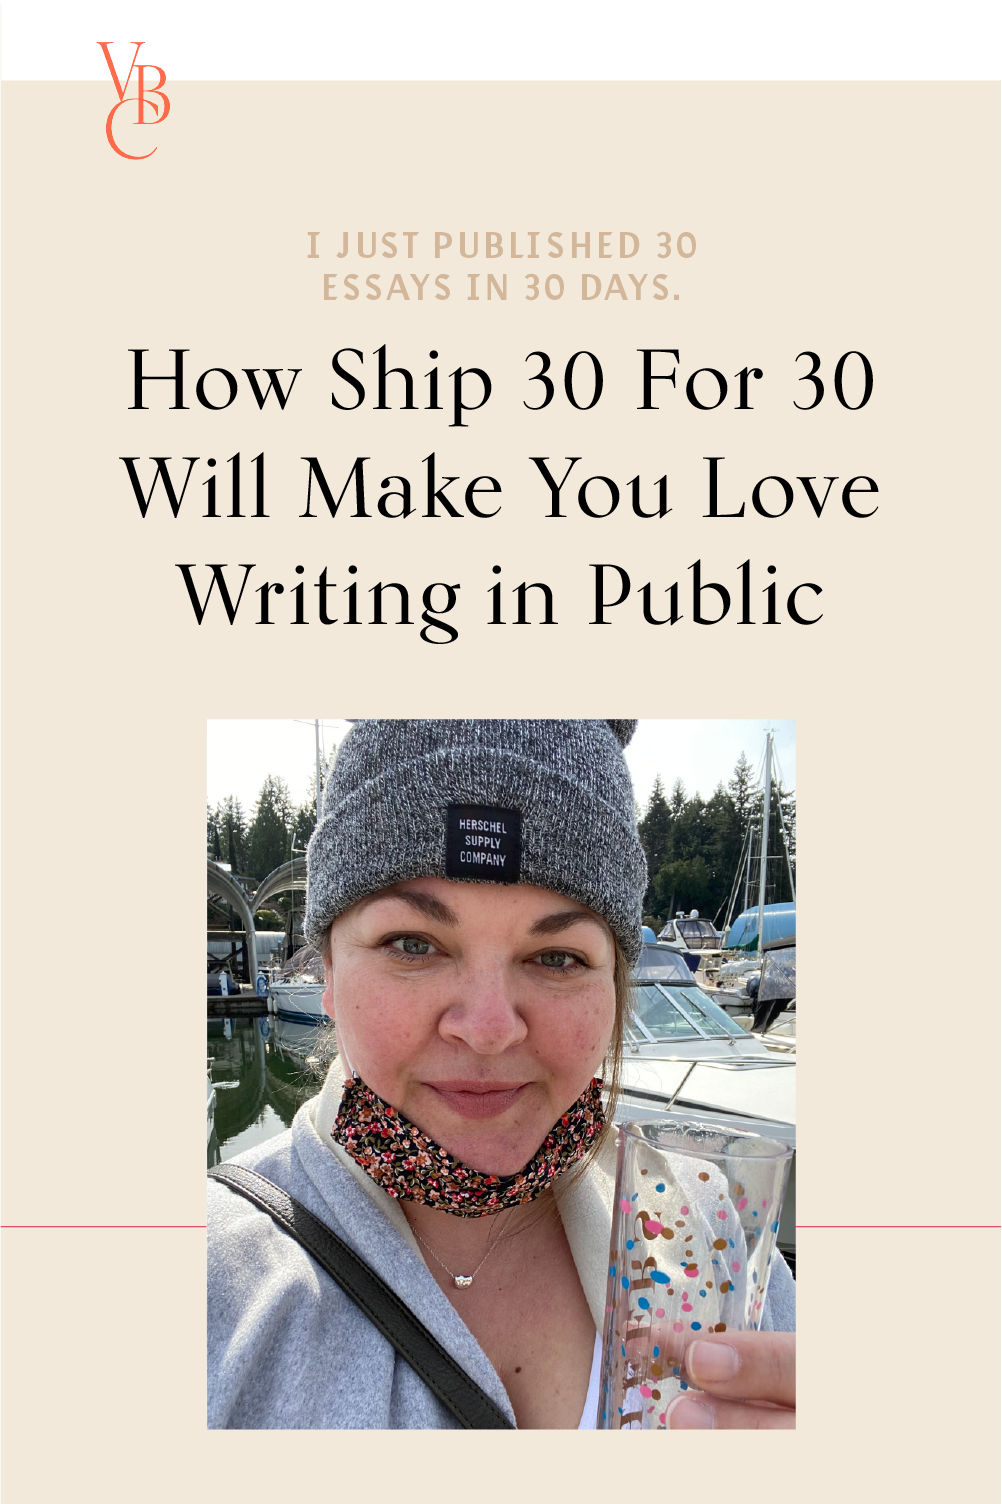 Ship 30 for 30 review - learn to love digital writing in public